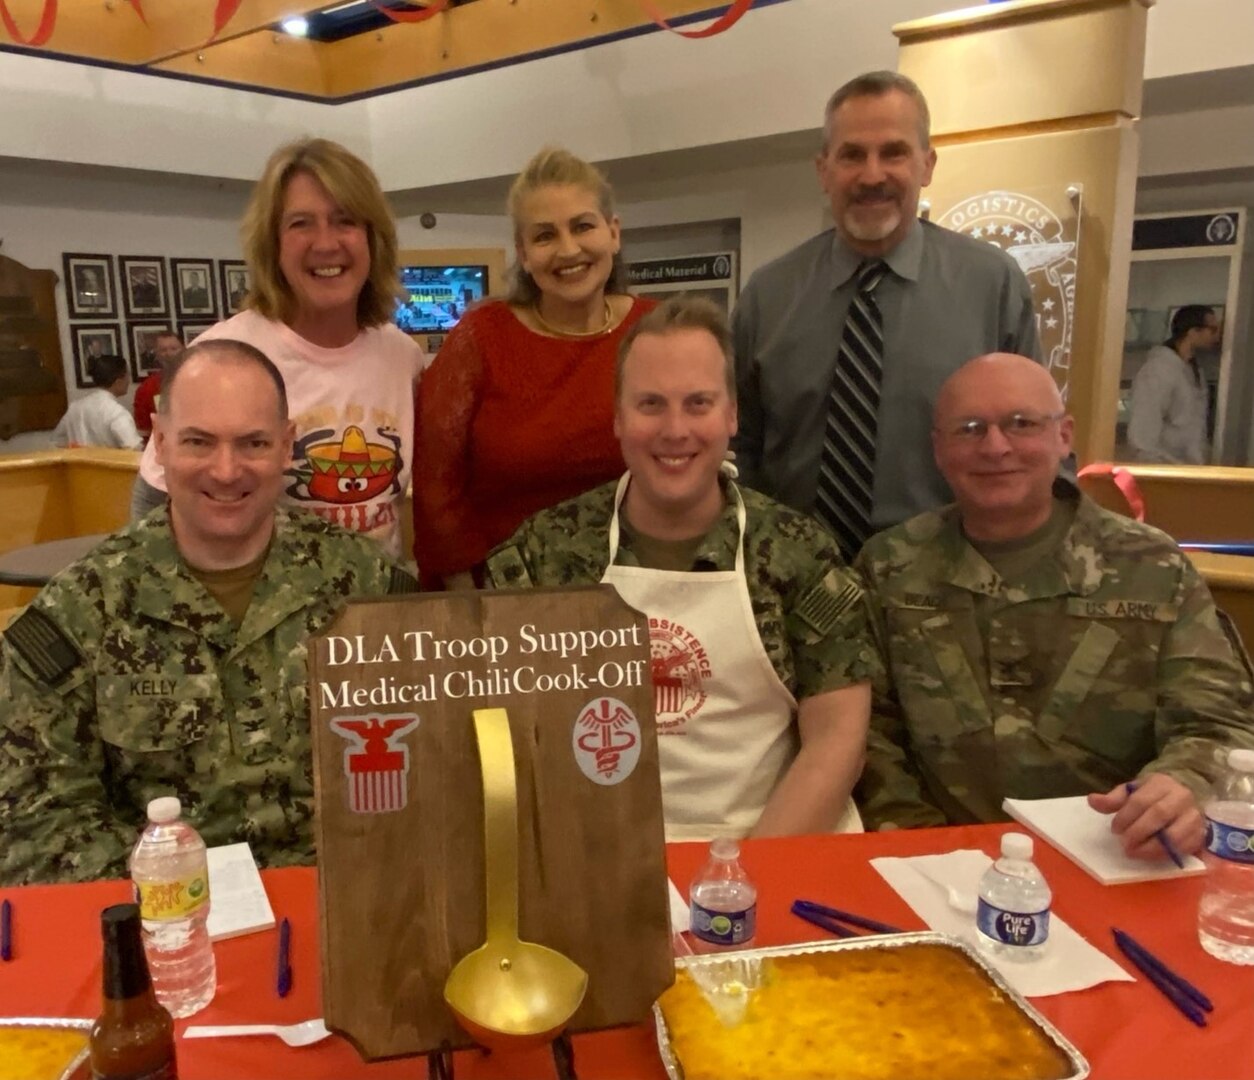 DLA Troop Support leadership poses with the trophy for the Medical Culture Improvement Team chili cook-off held March 29 in Philadelphia. (Photo by Alison Welski, DLA)